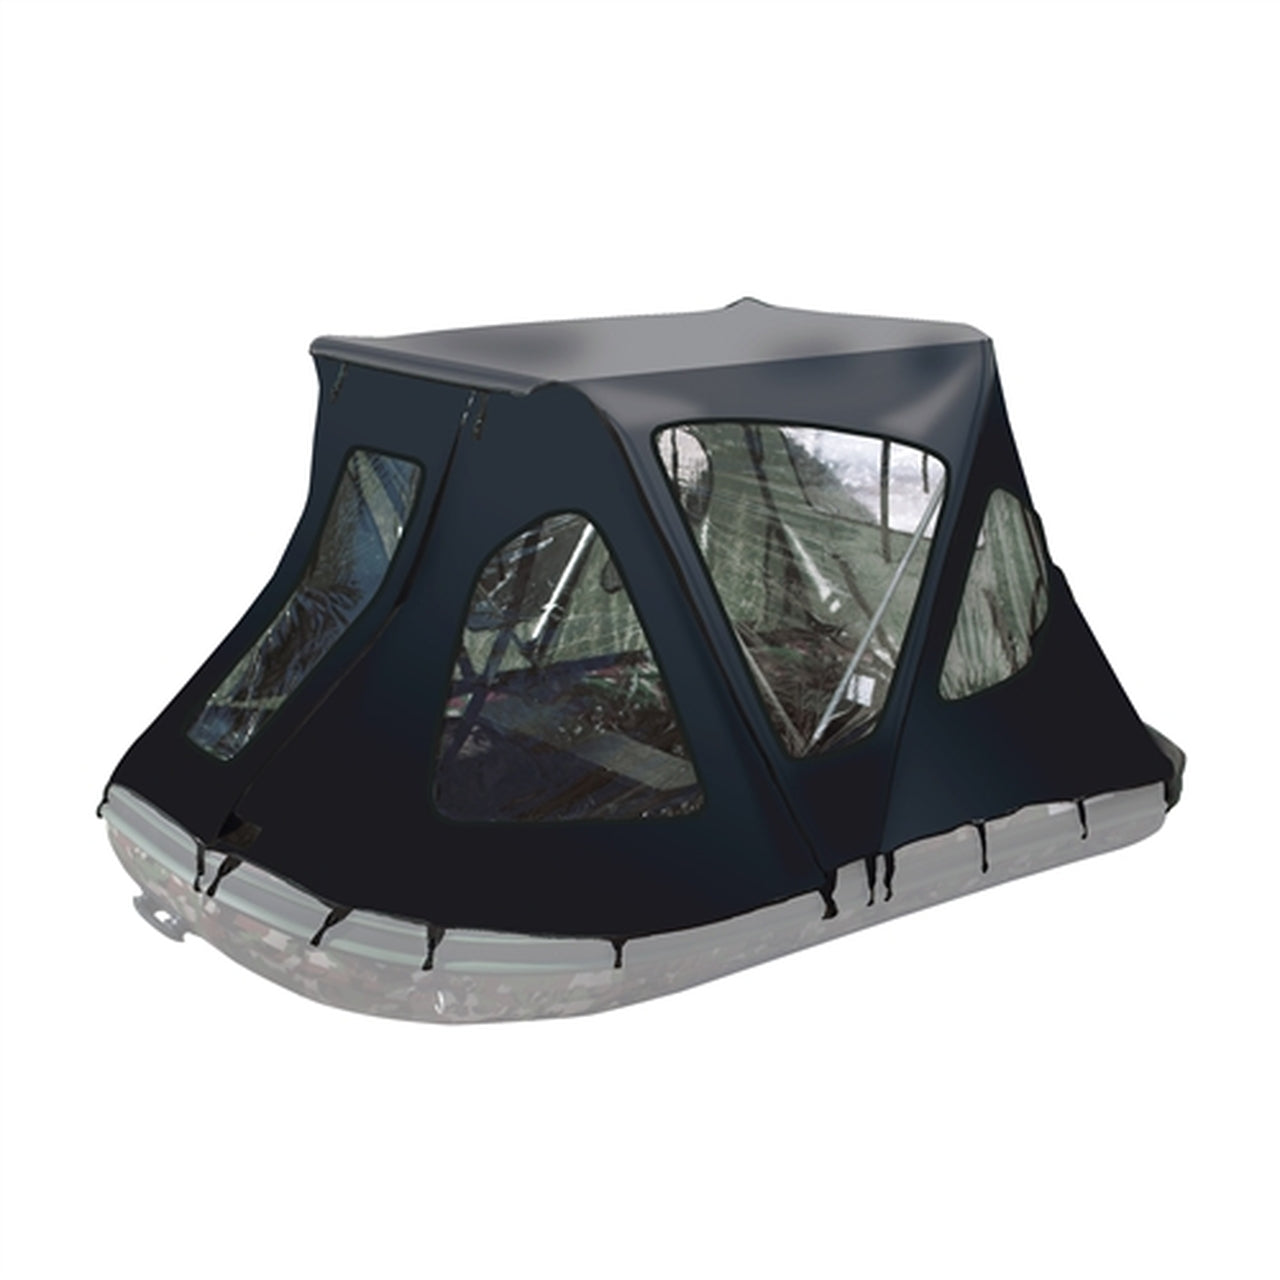 Aleko Boats Winter Waterproof Canopy Tent for Inflatable